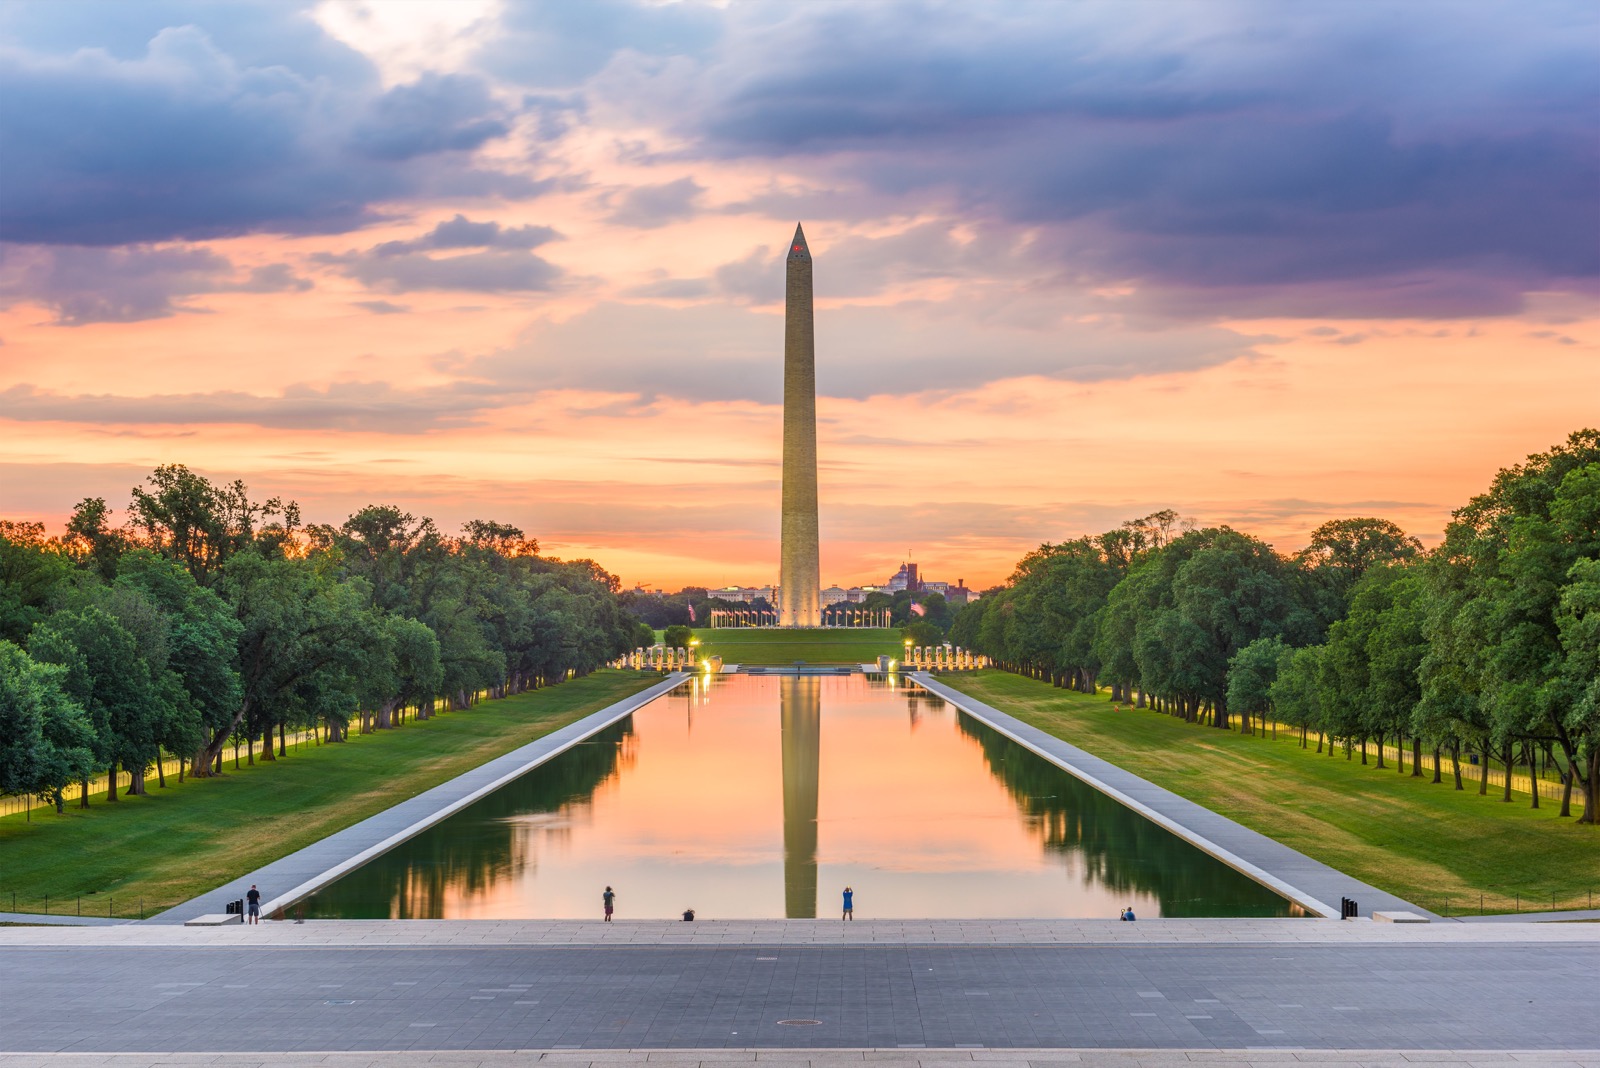 Even If You Don’t Know Much About Geography, Play This World Landmarks Quiz Anyway Washington Monument And The Reflecting Pool